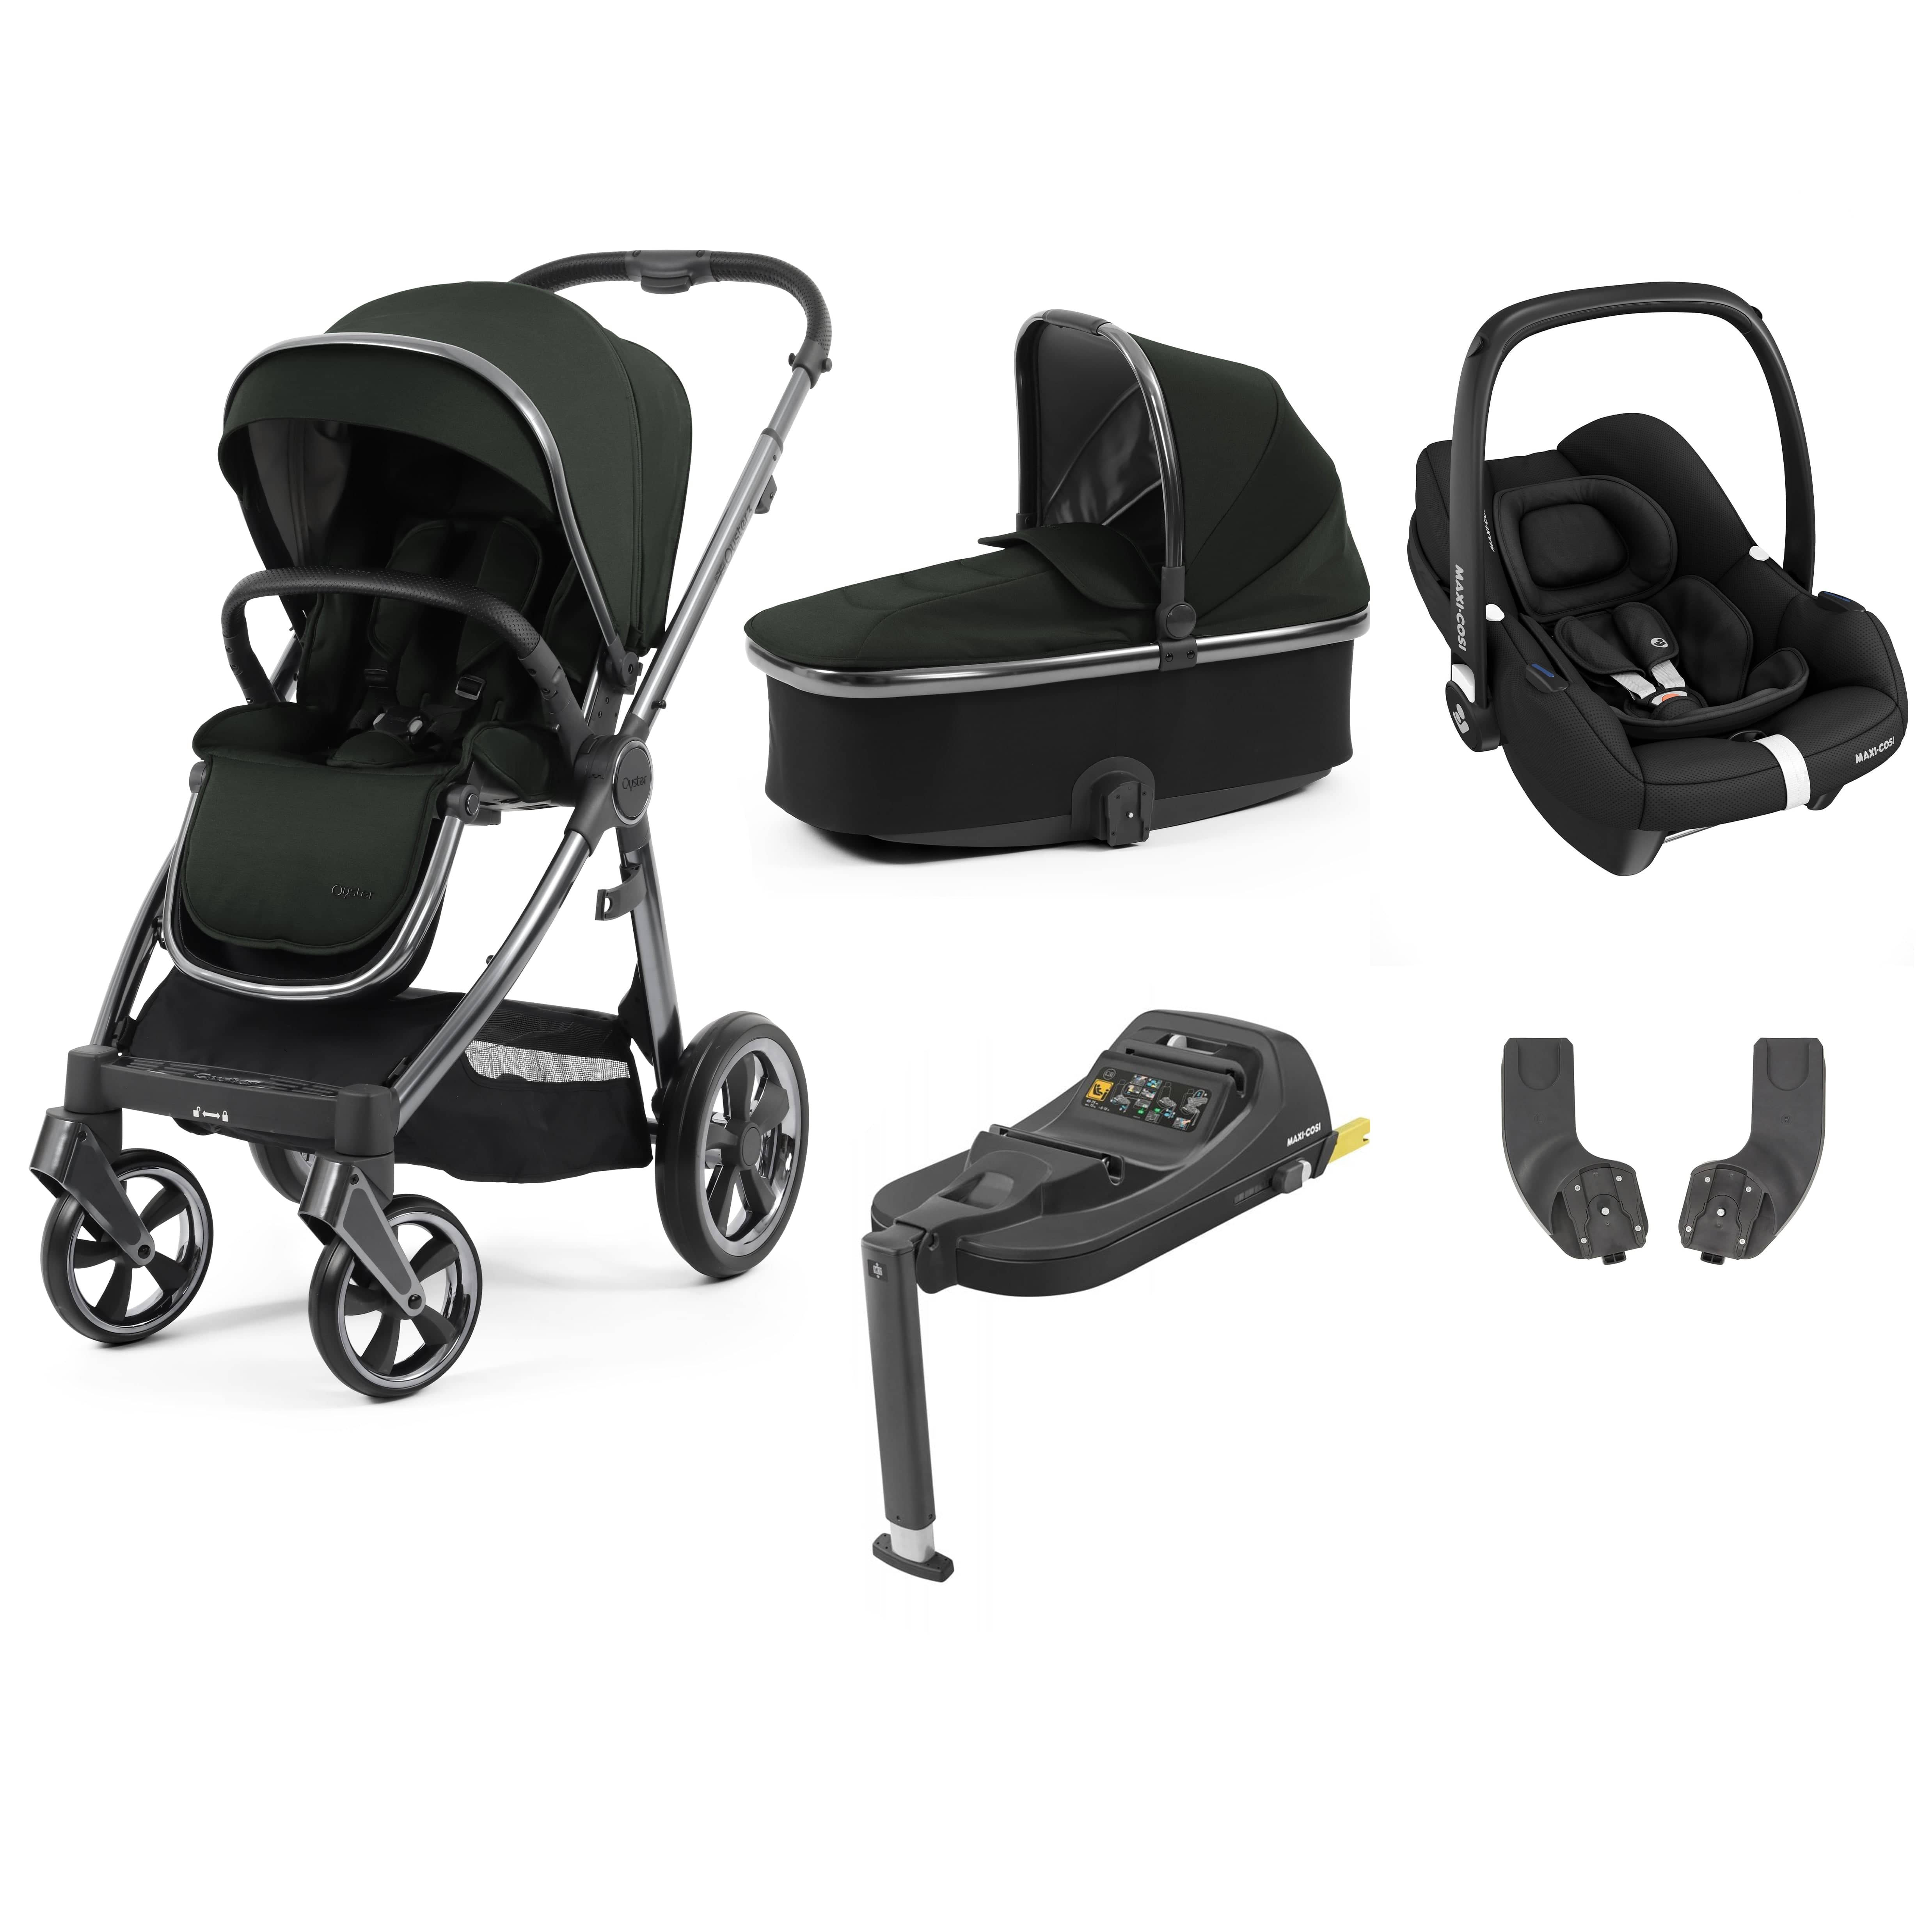 Babystyle Oyster 3 Essential Bundle with Car Seat in Black Olive Travel Systems 14761-BLO 5060711567211